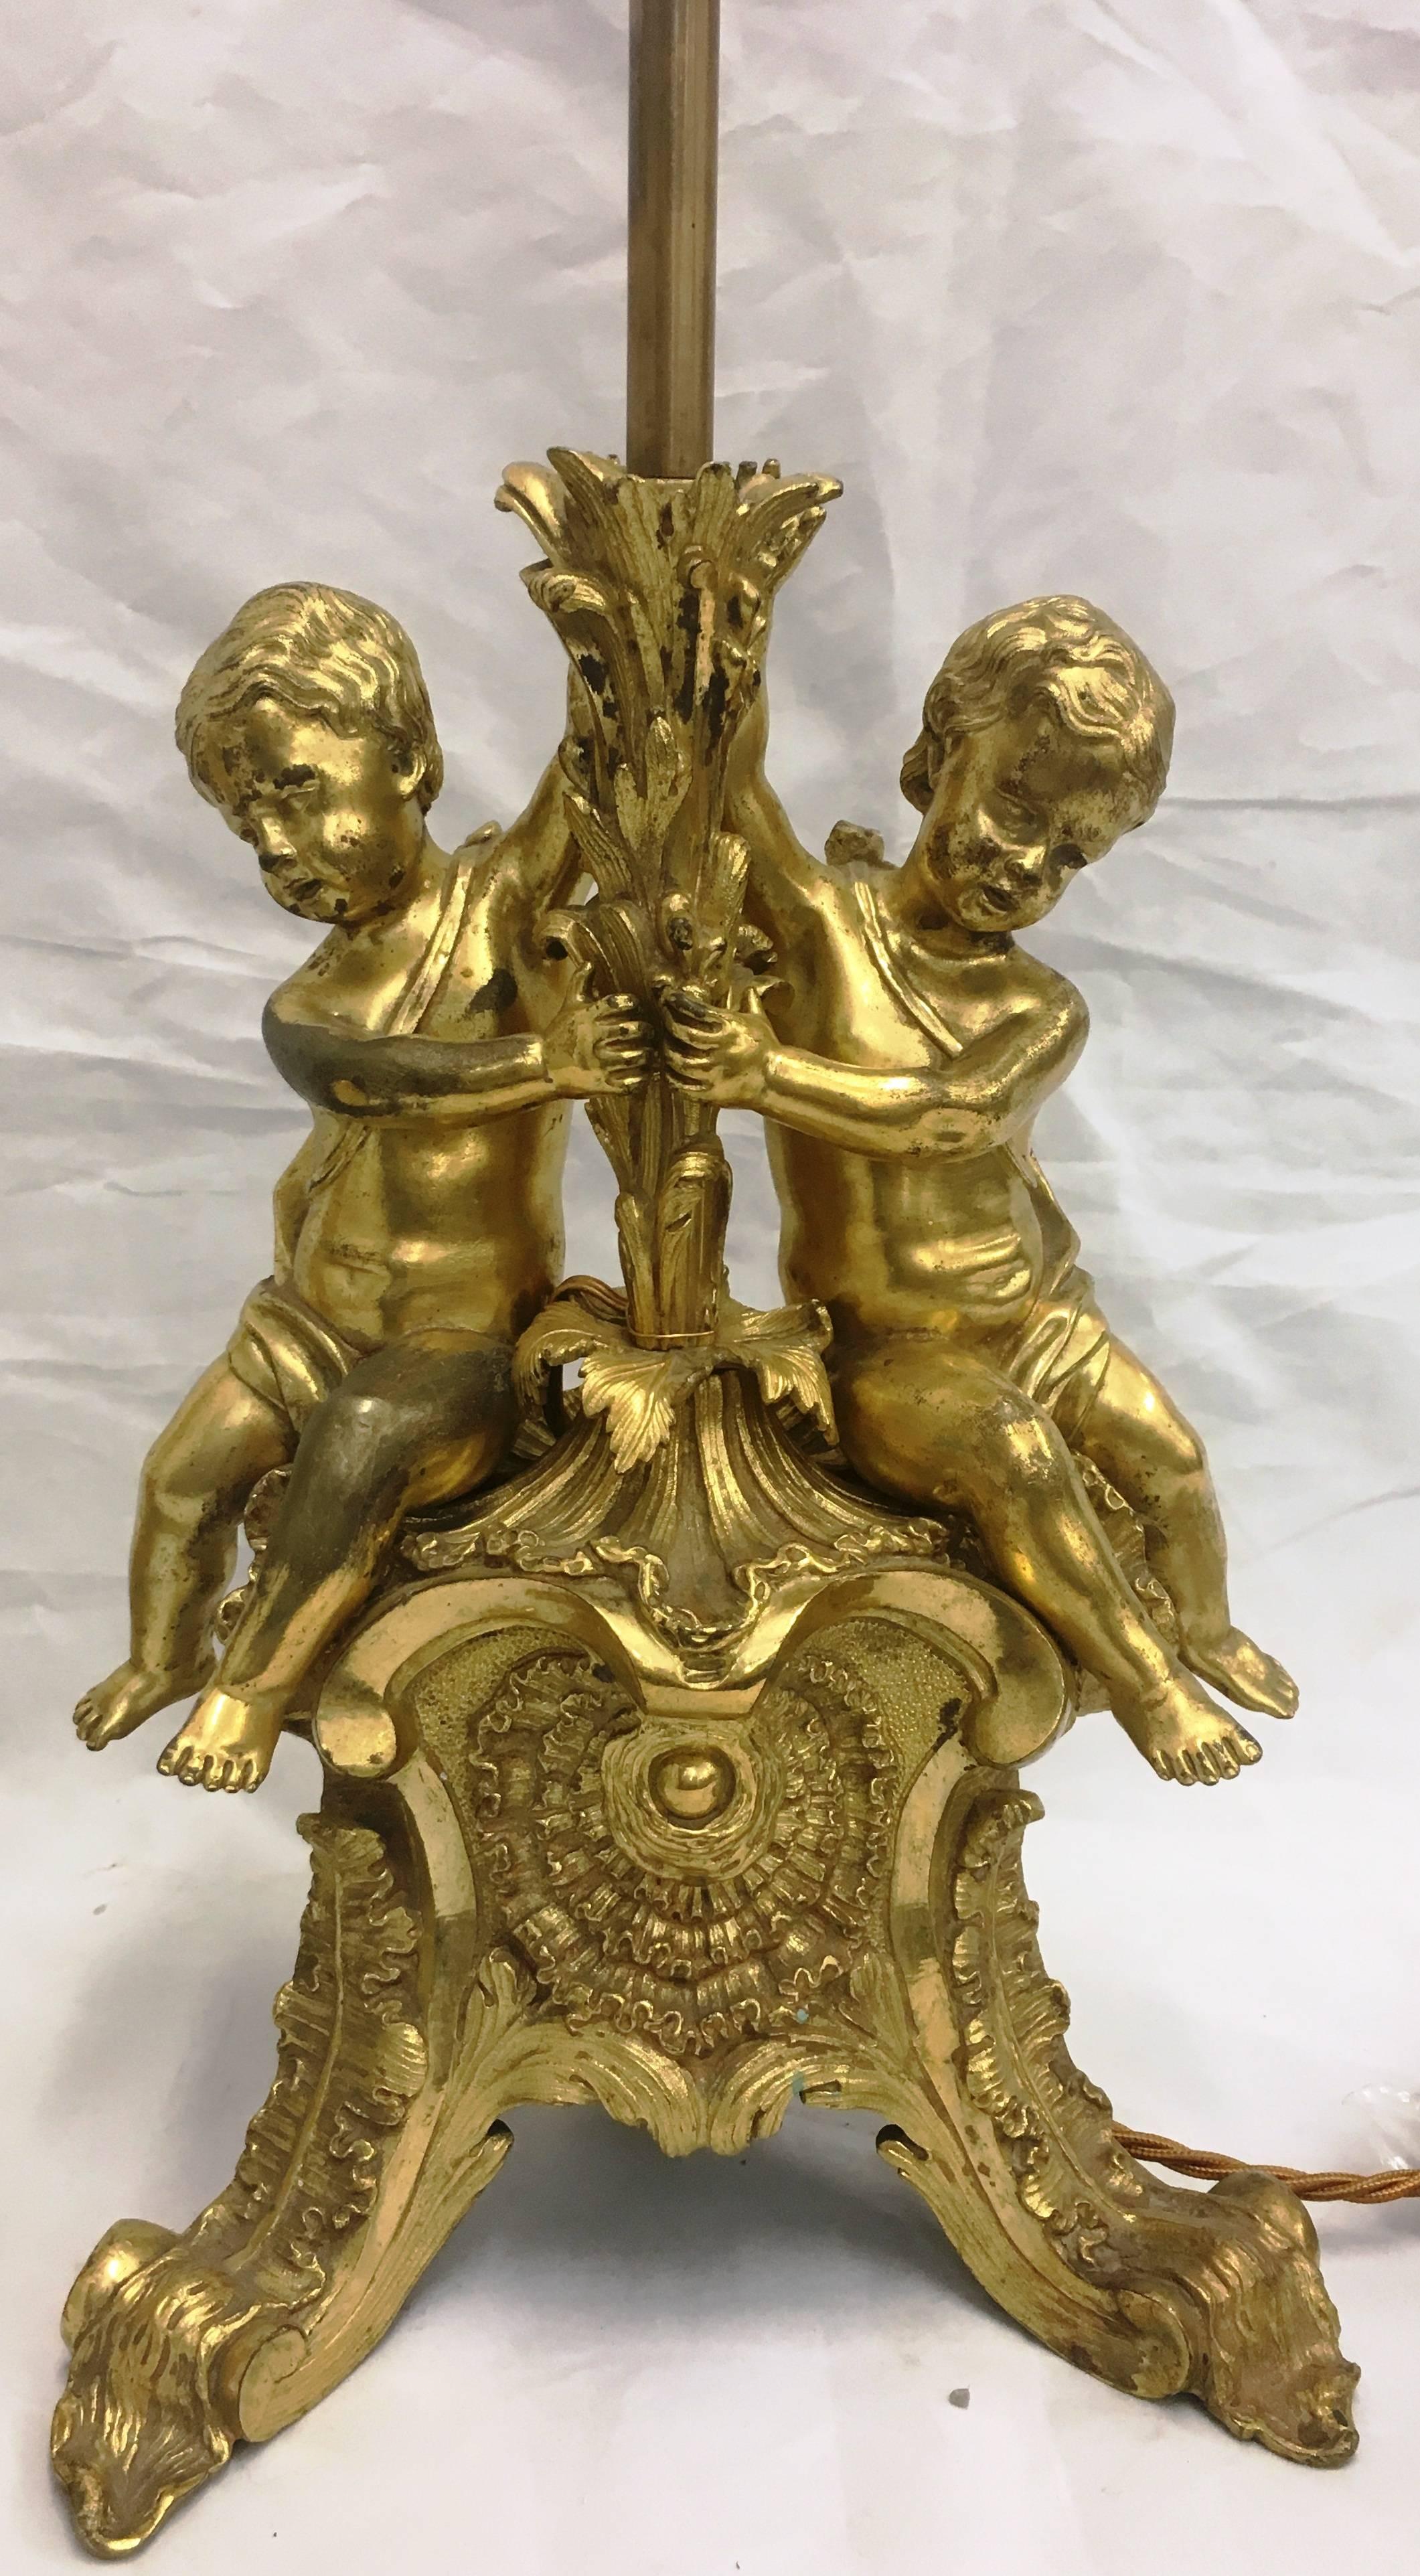 A good quality pair of French 19th century gilded ormolu lamps, each having two putti seated on a scrolling foliate base.